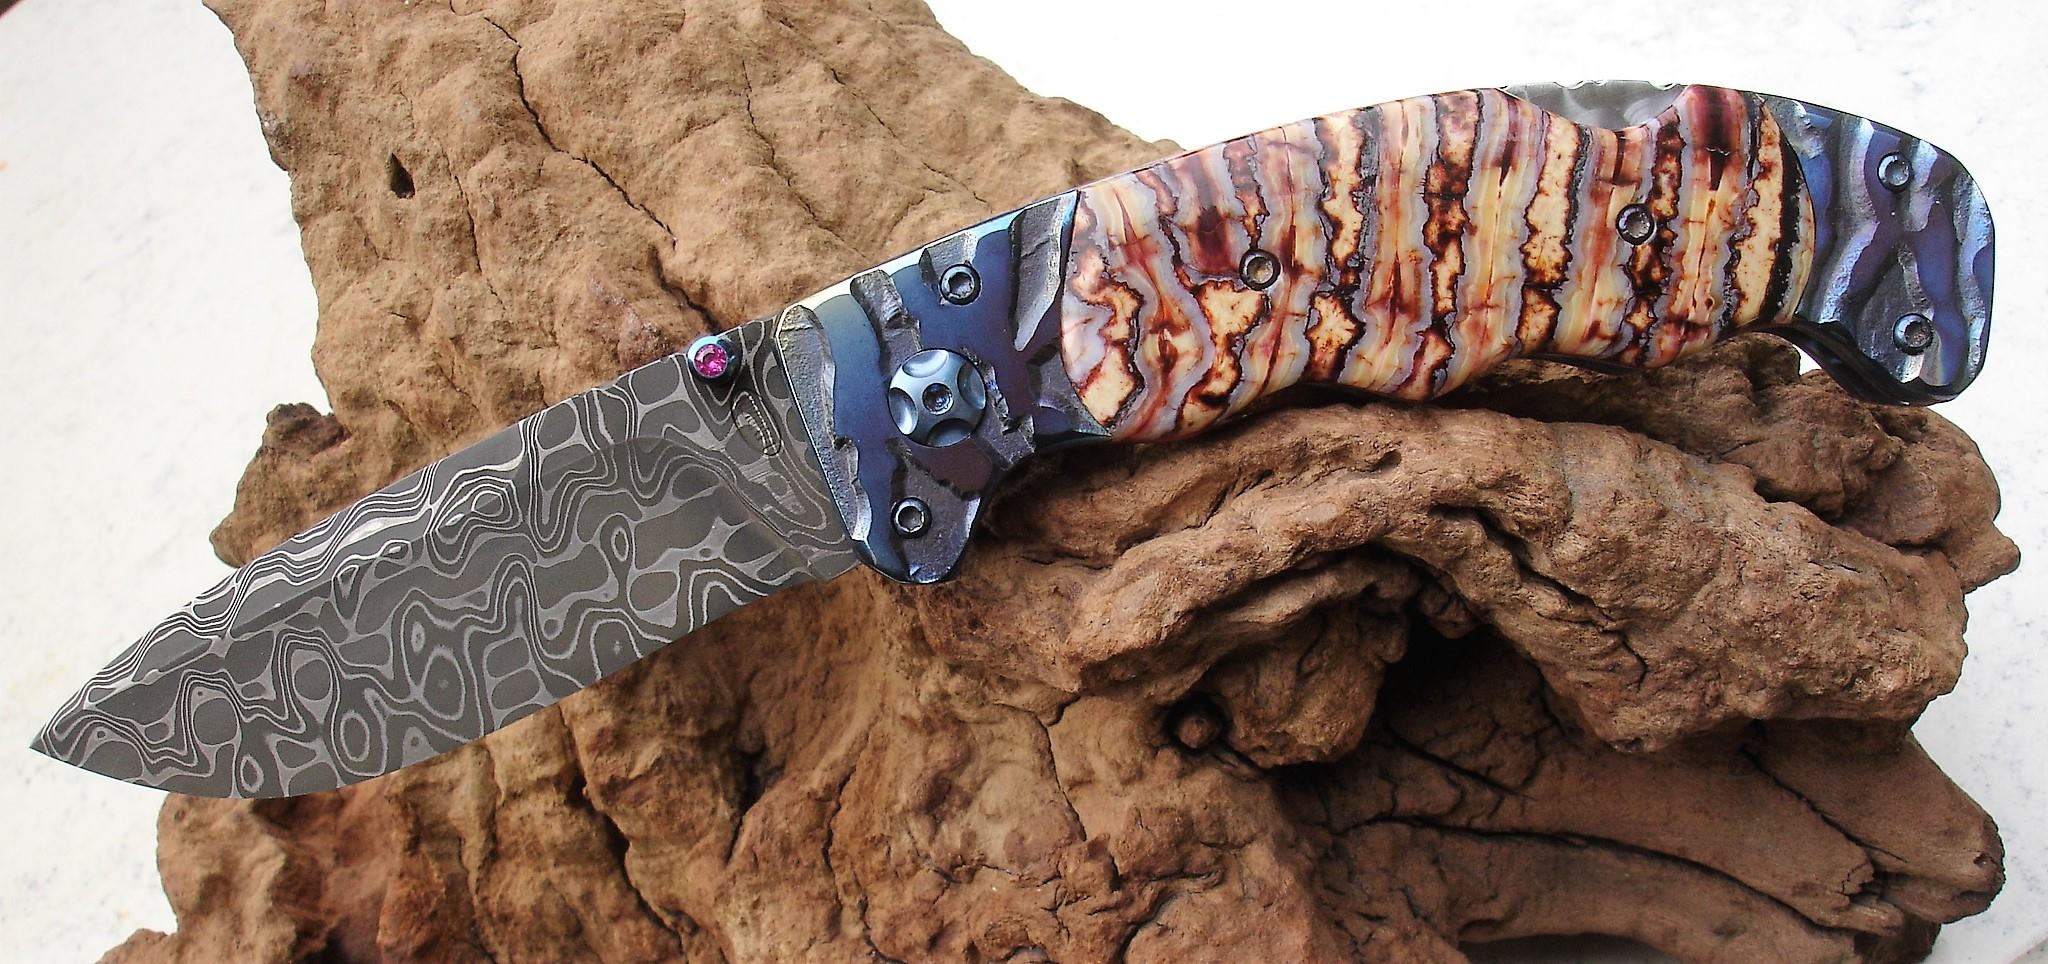 Tim Lambkin does meticulous filework inside and out on his folding knives.